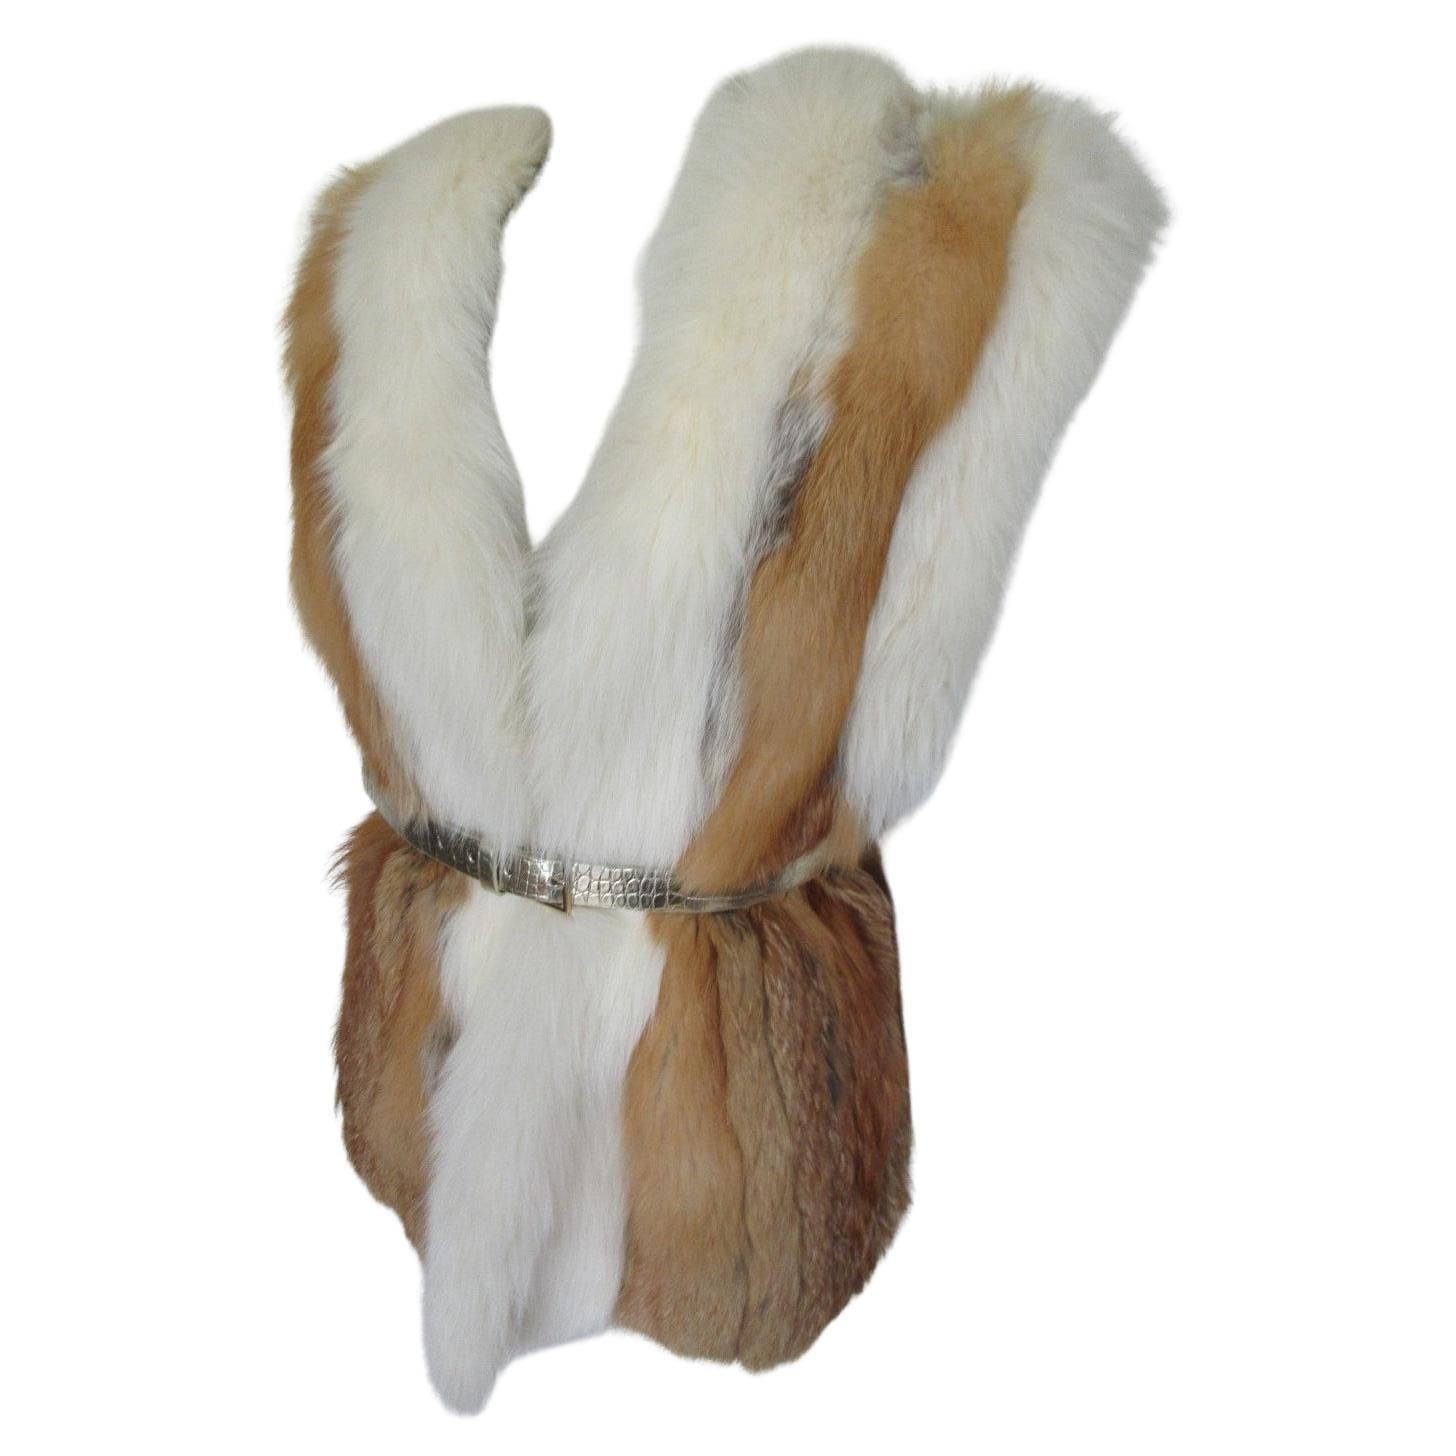 Exclusive Golden Island red/white fox fur vest

We offer more vintage fur items, view our frontstore

Details:
This vest has 2 pockets, 2 closing hooks and is very soft and supple and light to wear.
Size fits like a medium to large, please check